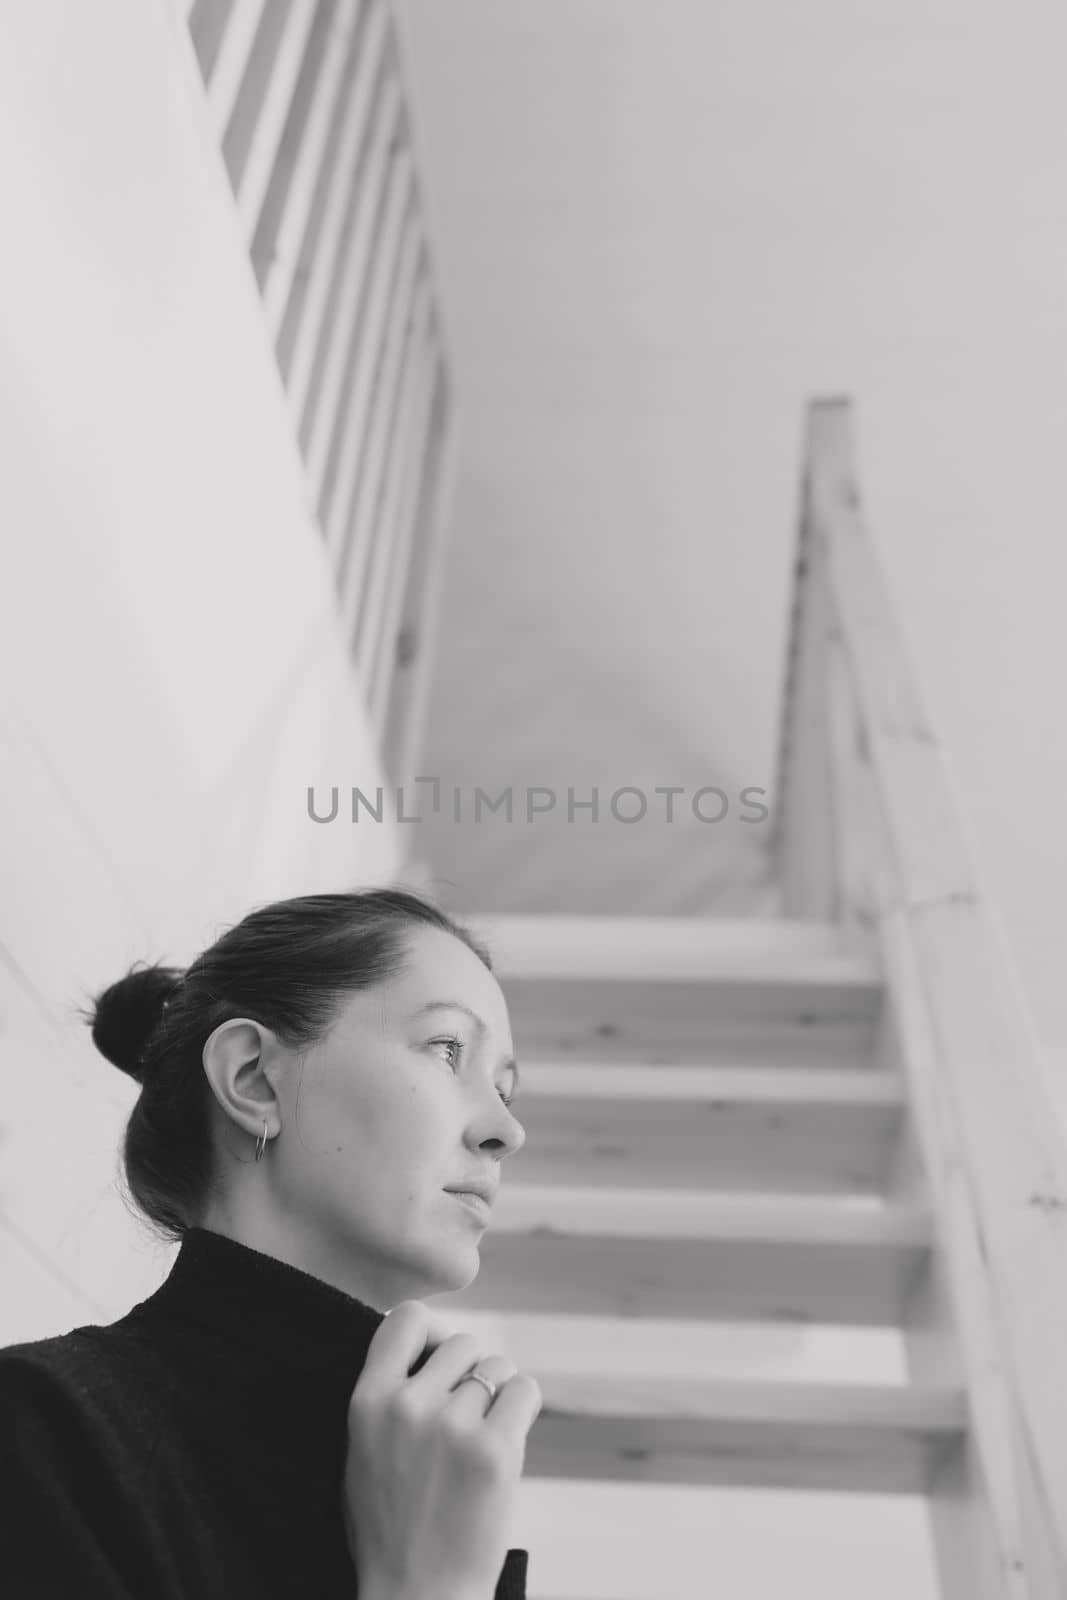 Young woman simple hairstyle against wooden stairs. Depression, loneliness and quarantine concept. Mental health, Self care, staying home.